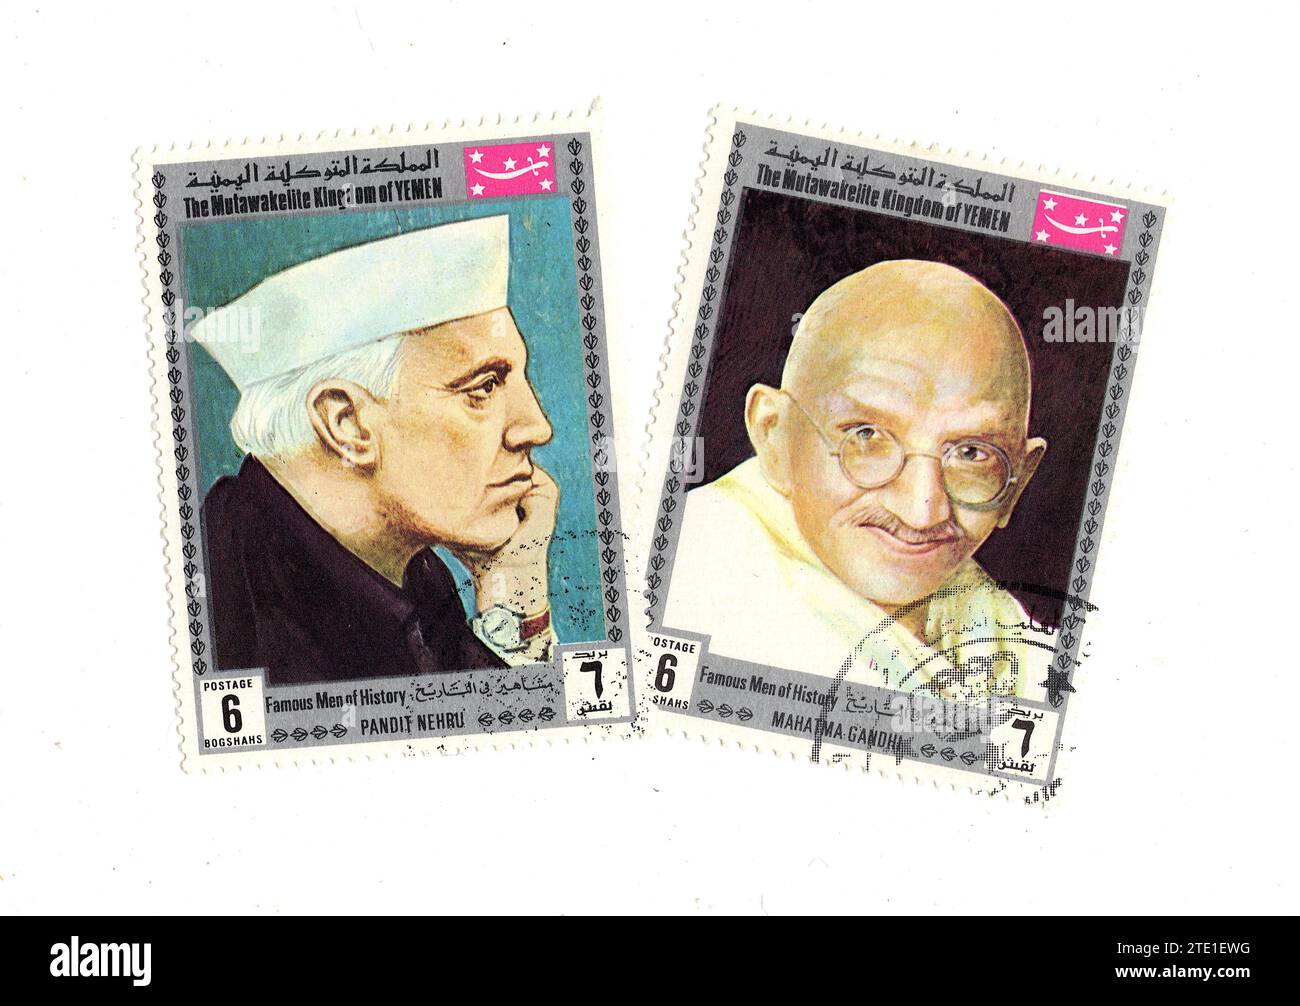 Vintage postage stamps from Yemen featuring portraits of Mahatma Gandhi and Pandit Nehru isolated on a white background. Stock Photo